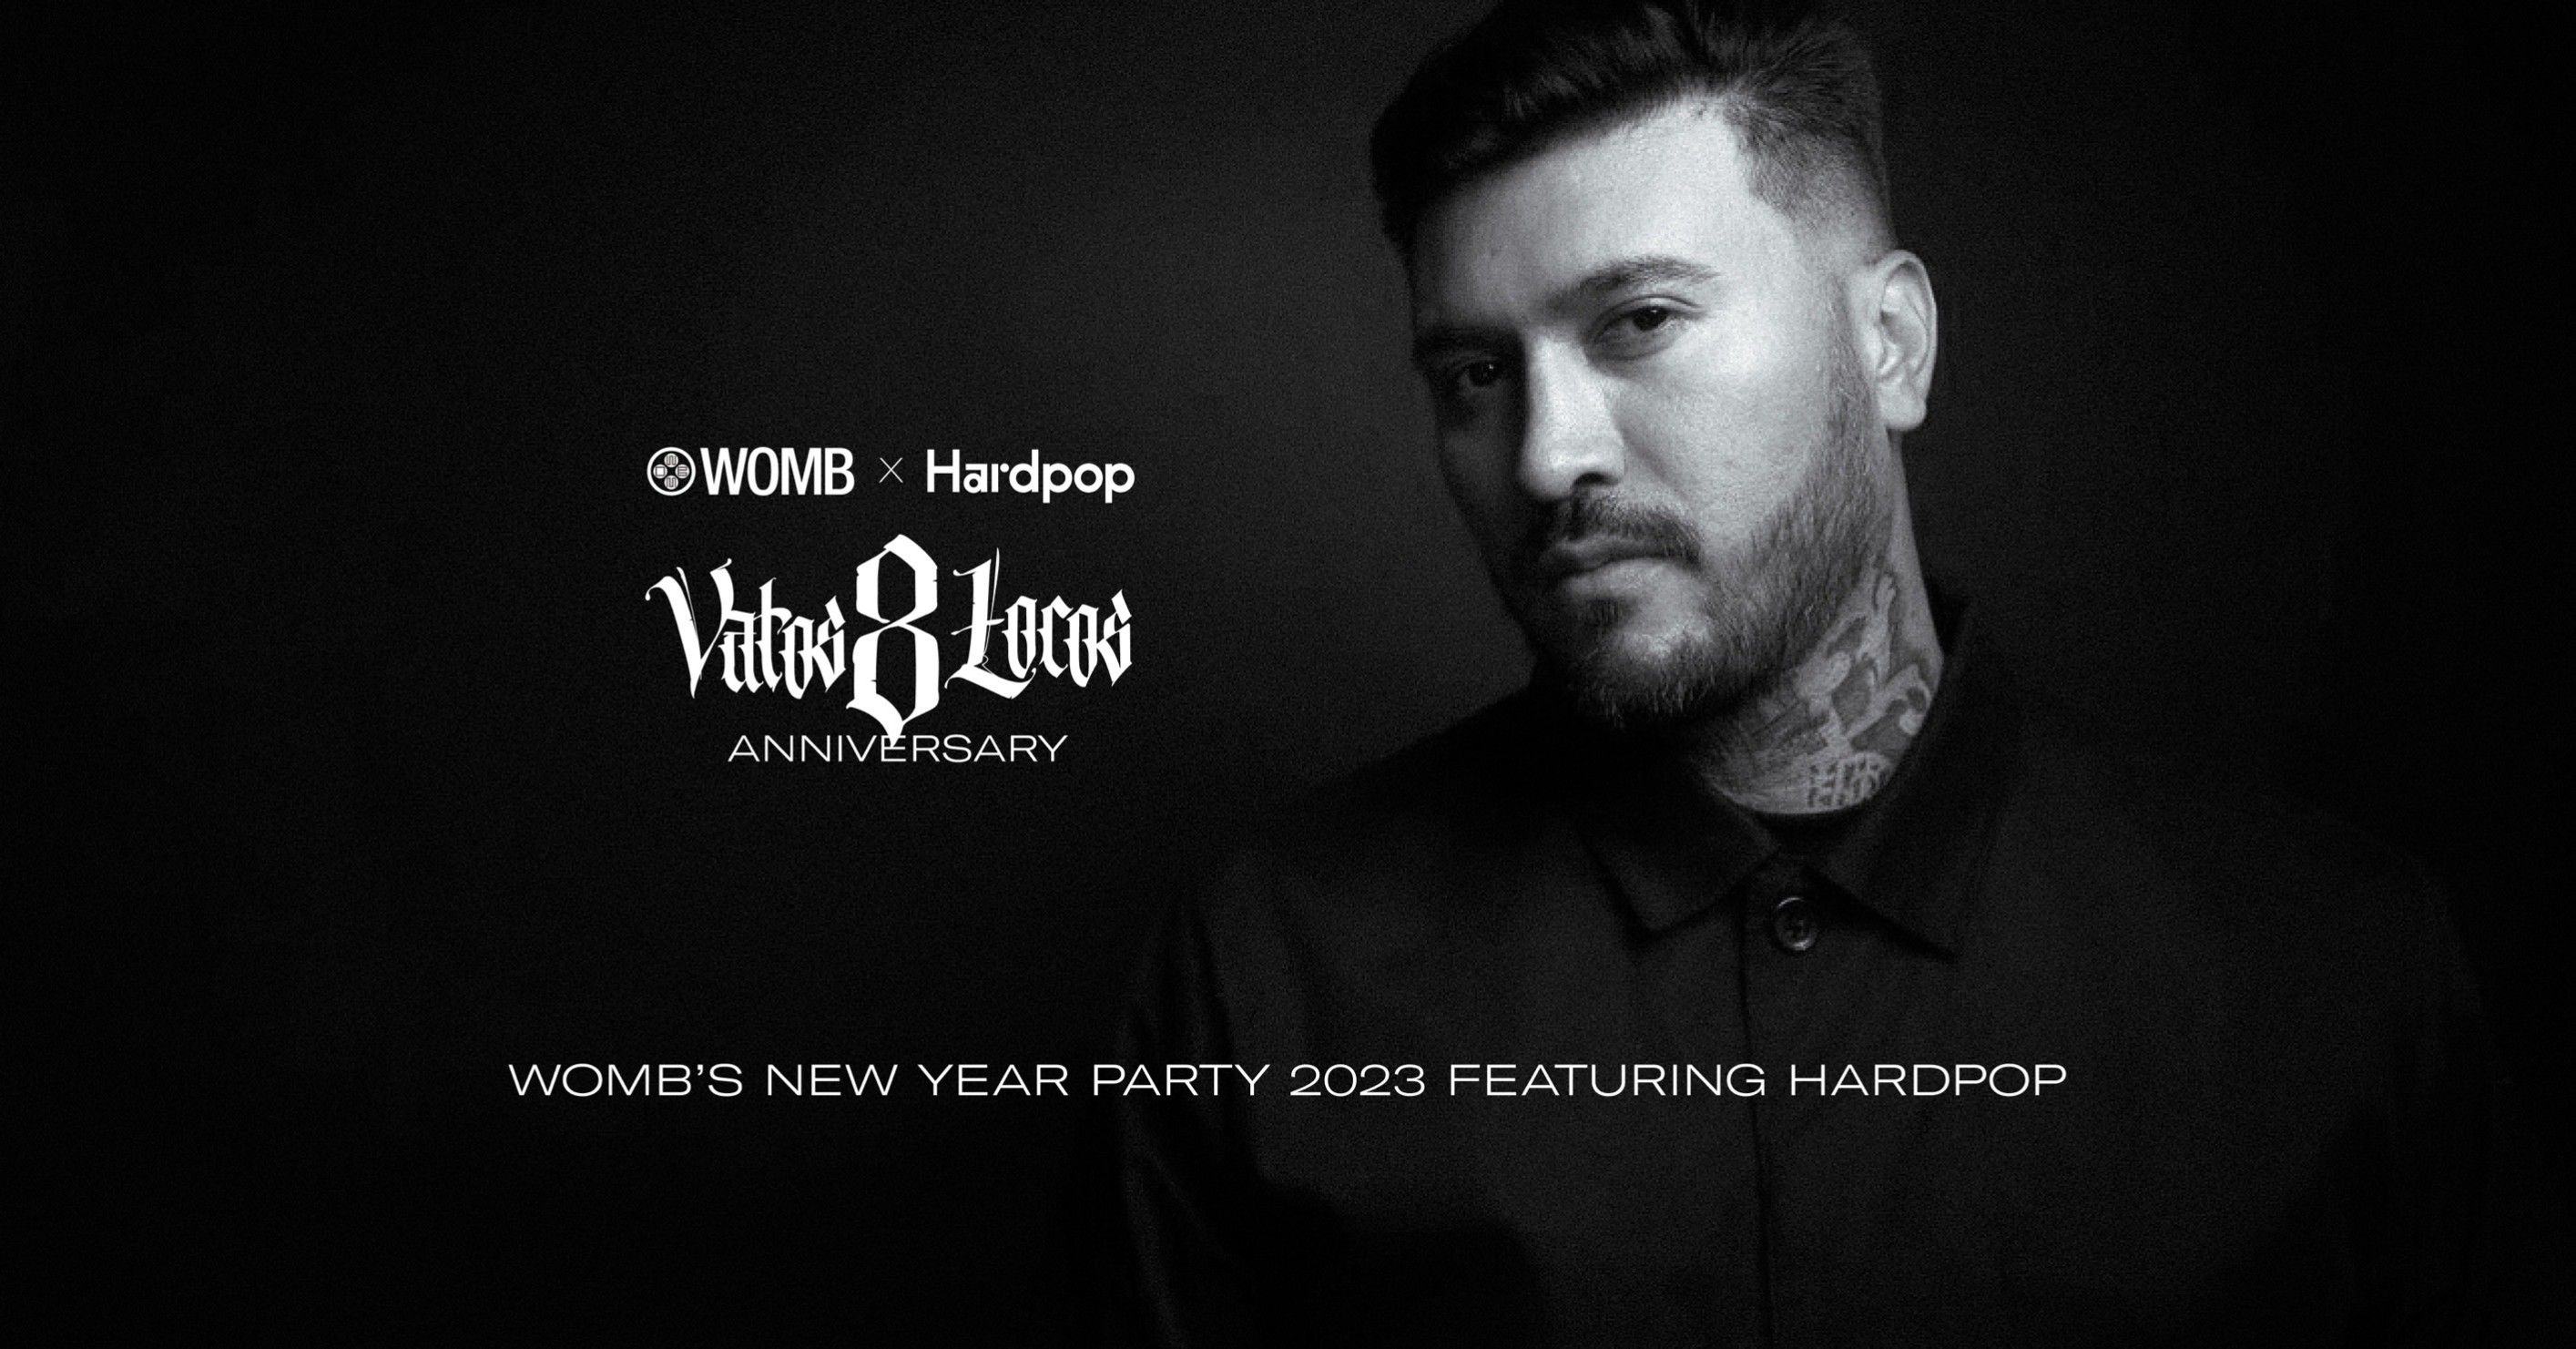 WOMB NEW YEAR PARTY  2023 FEATURING HARDPOP